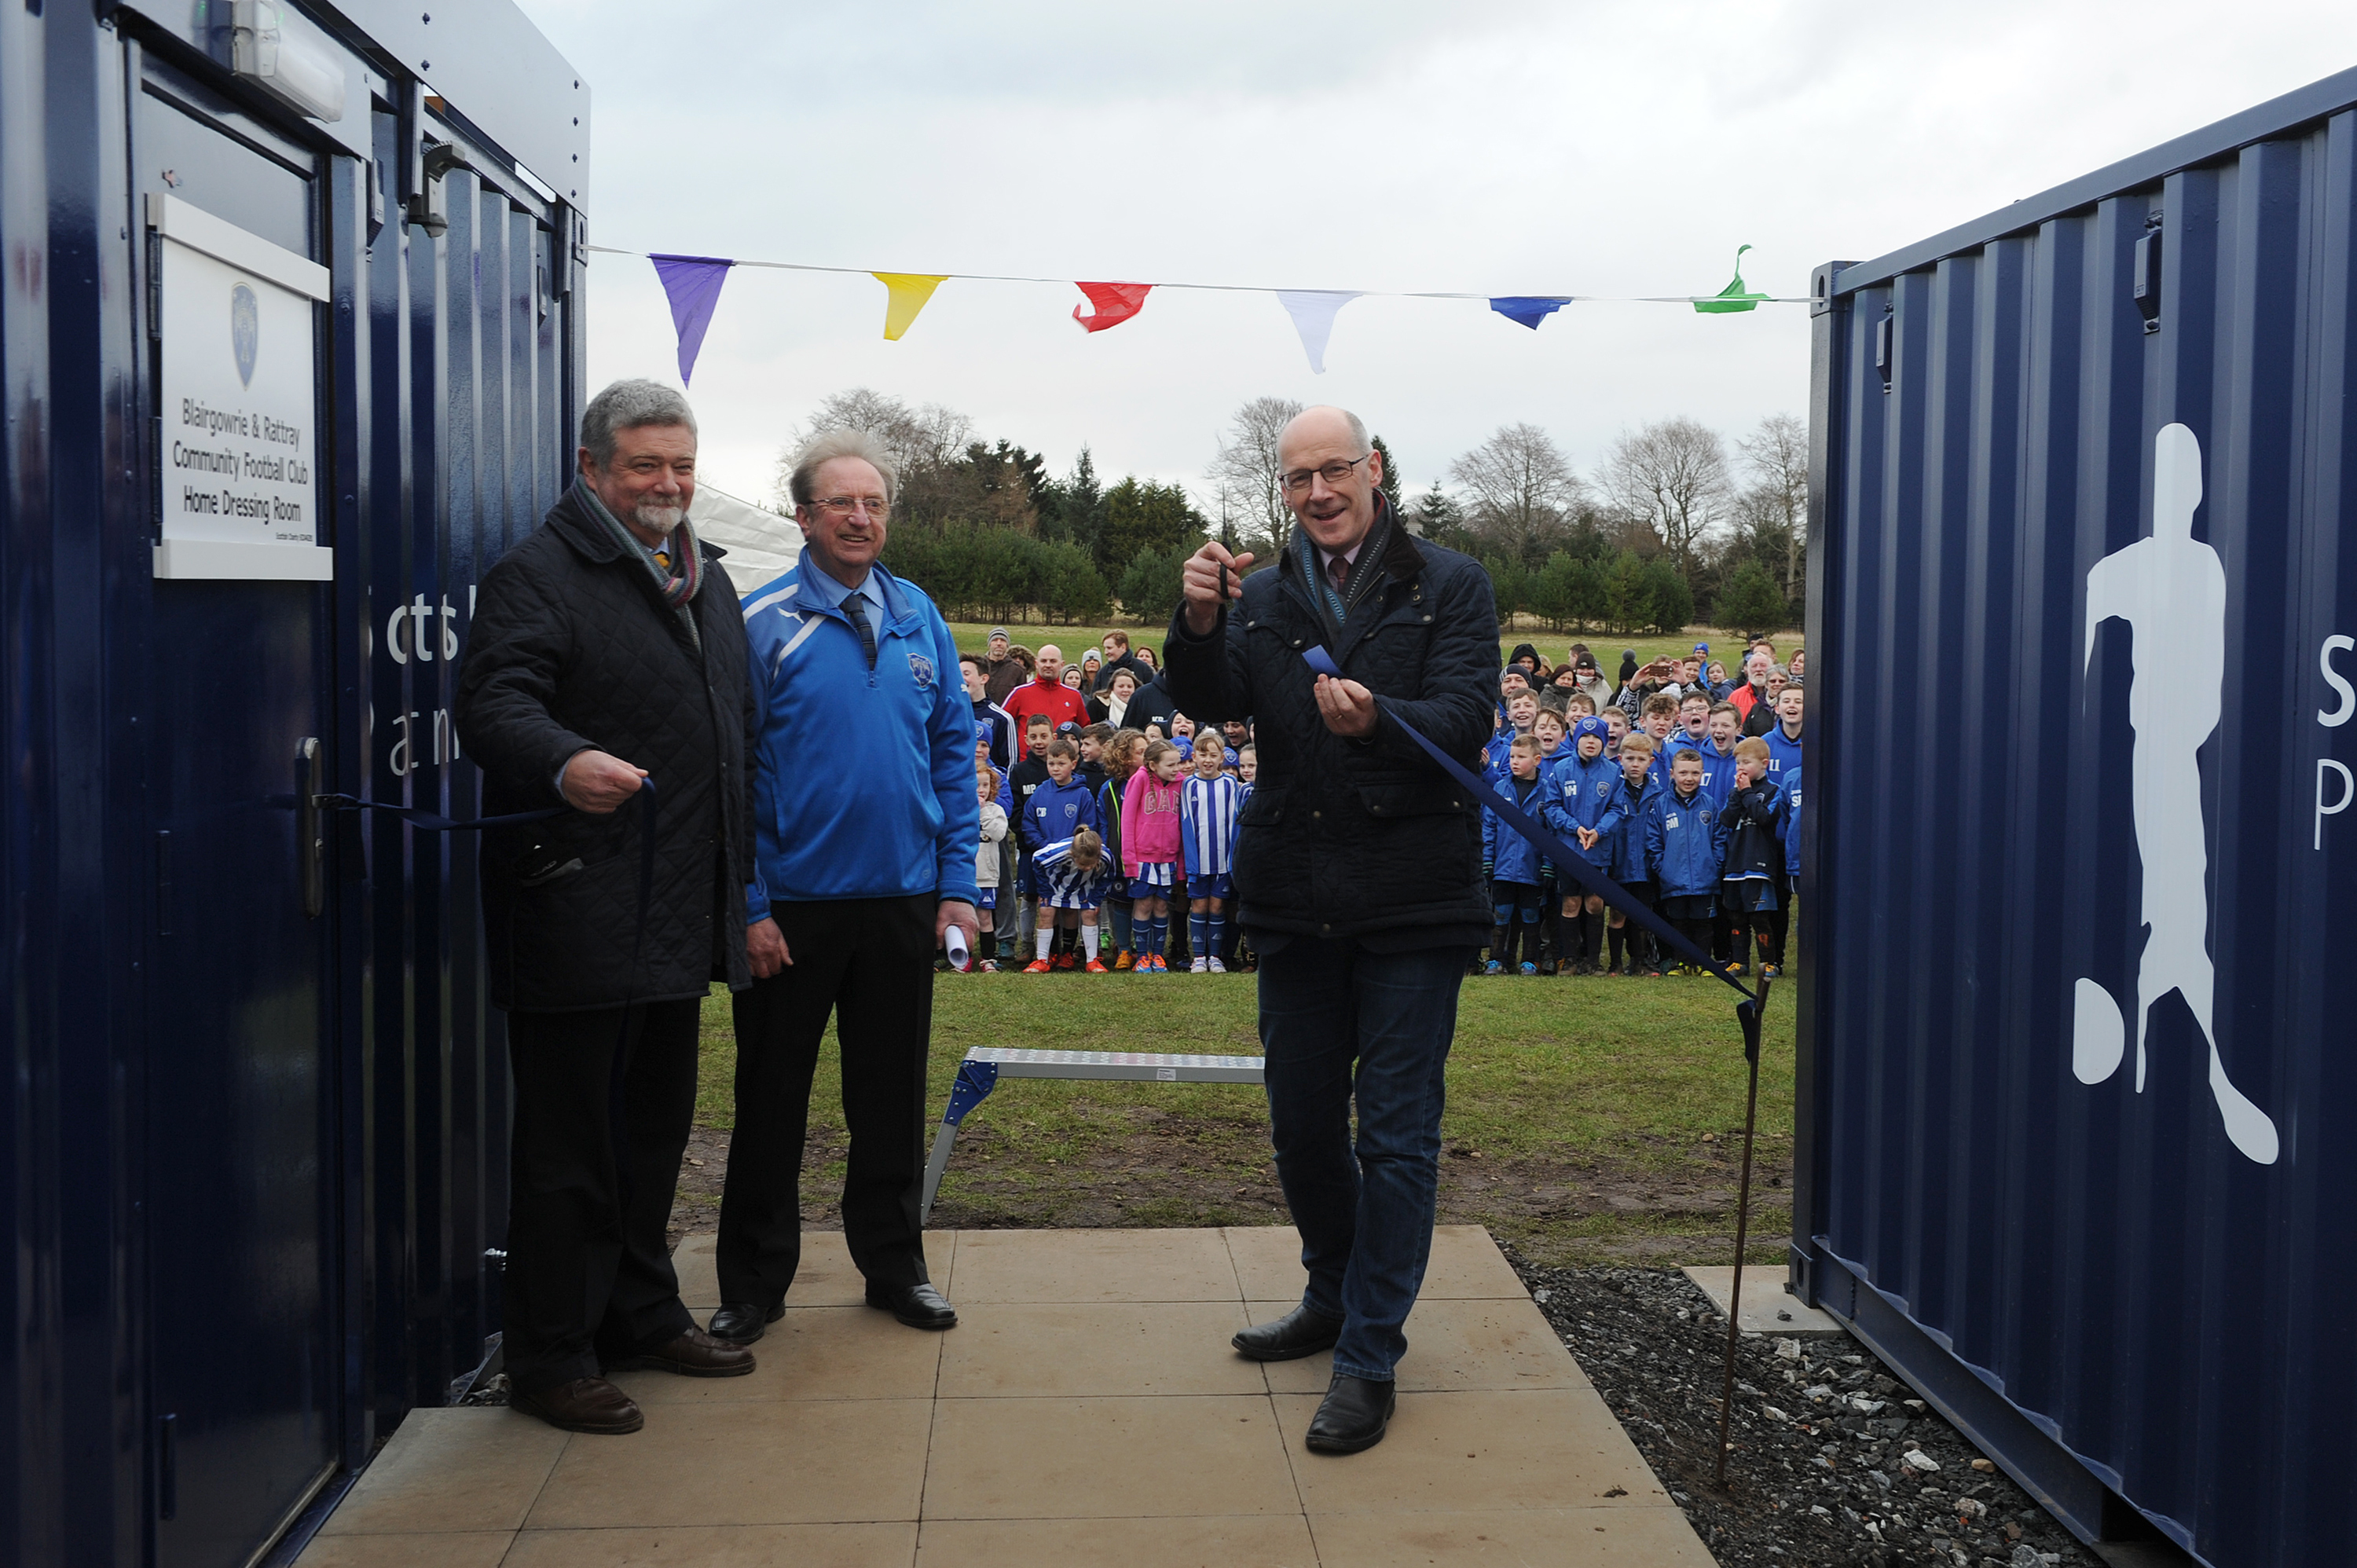 The new changing facilities, unveiled by John Swinney at the start of this year, were vandalised, leading to a decision to lock the car park.
L to r - James Clydesdale (Chair of the Scottish Football Partnership), Sandy Thomson (Chair Blairgowrie and Rattray Community FC) and John Swinney.